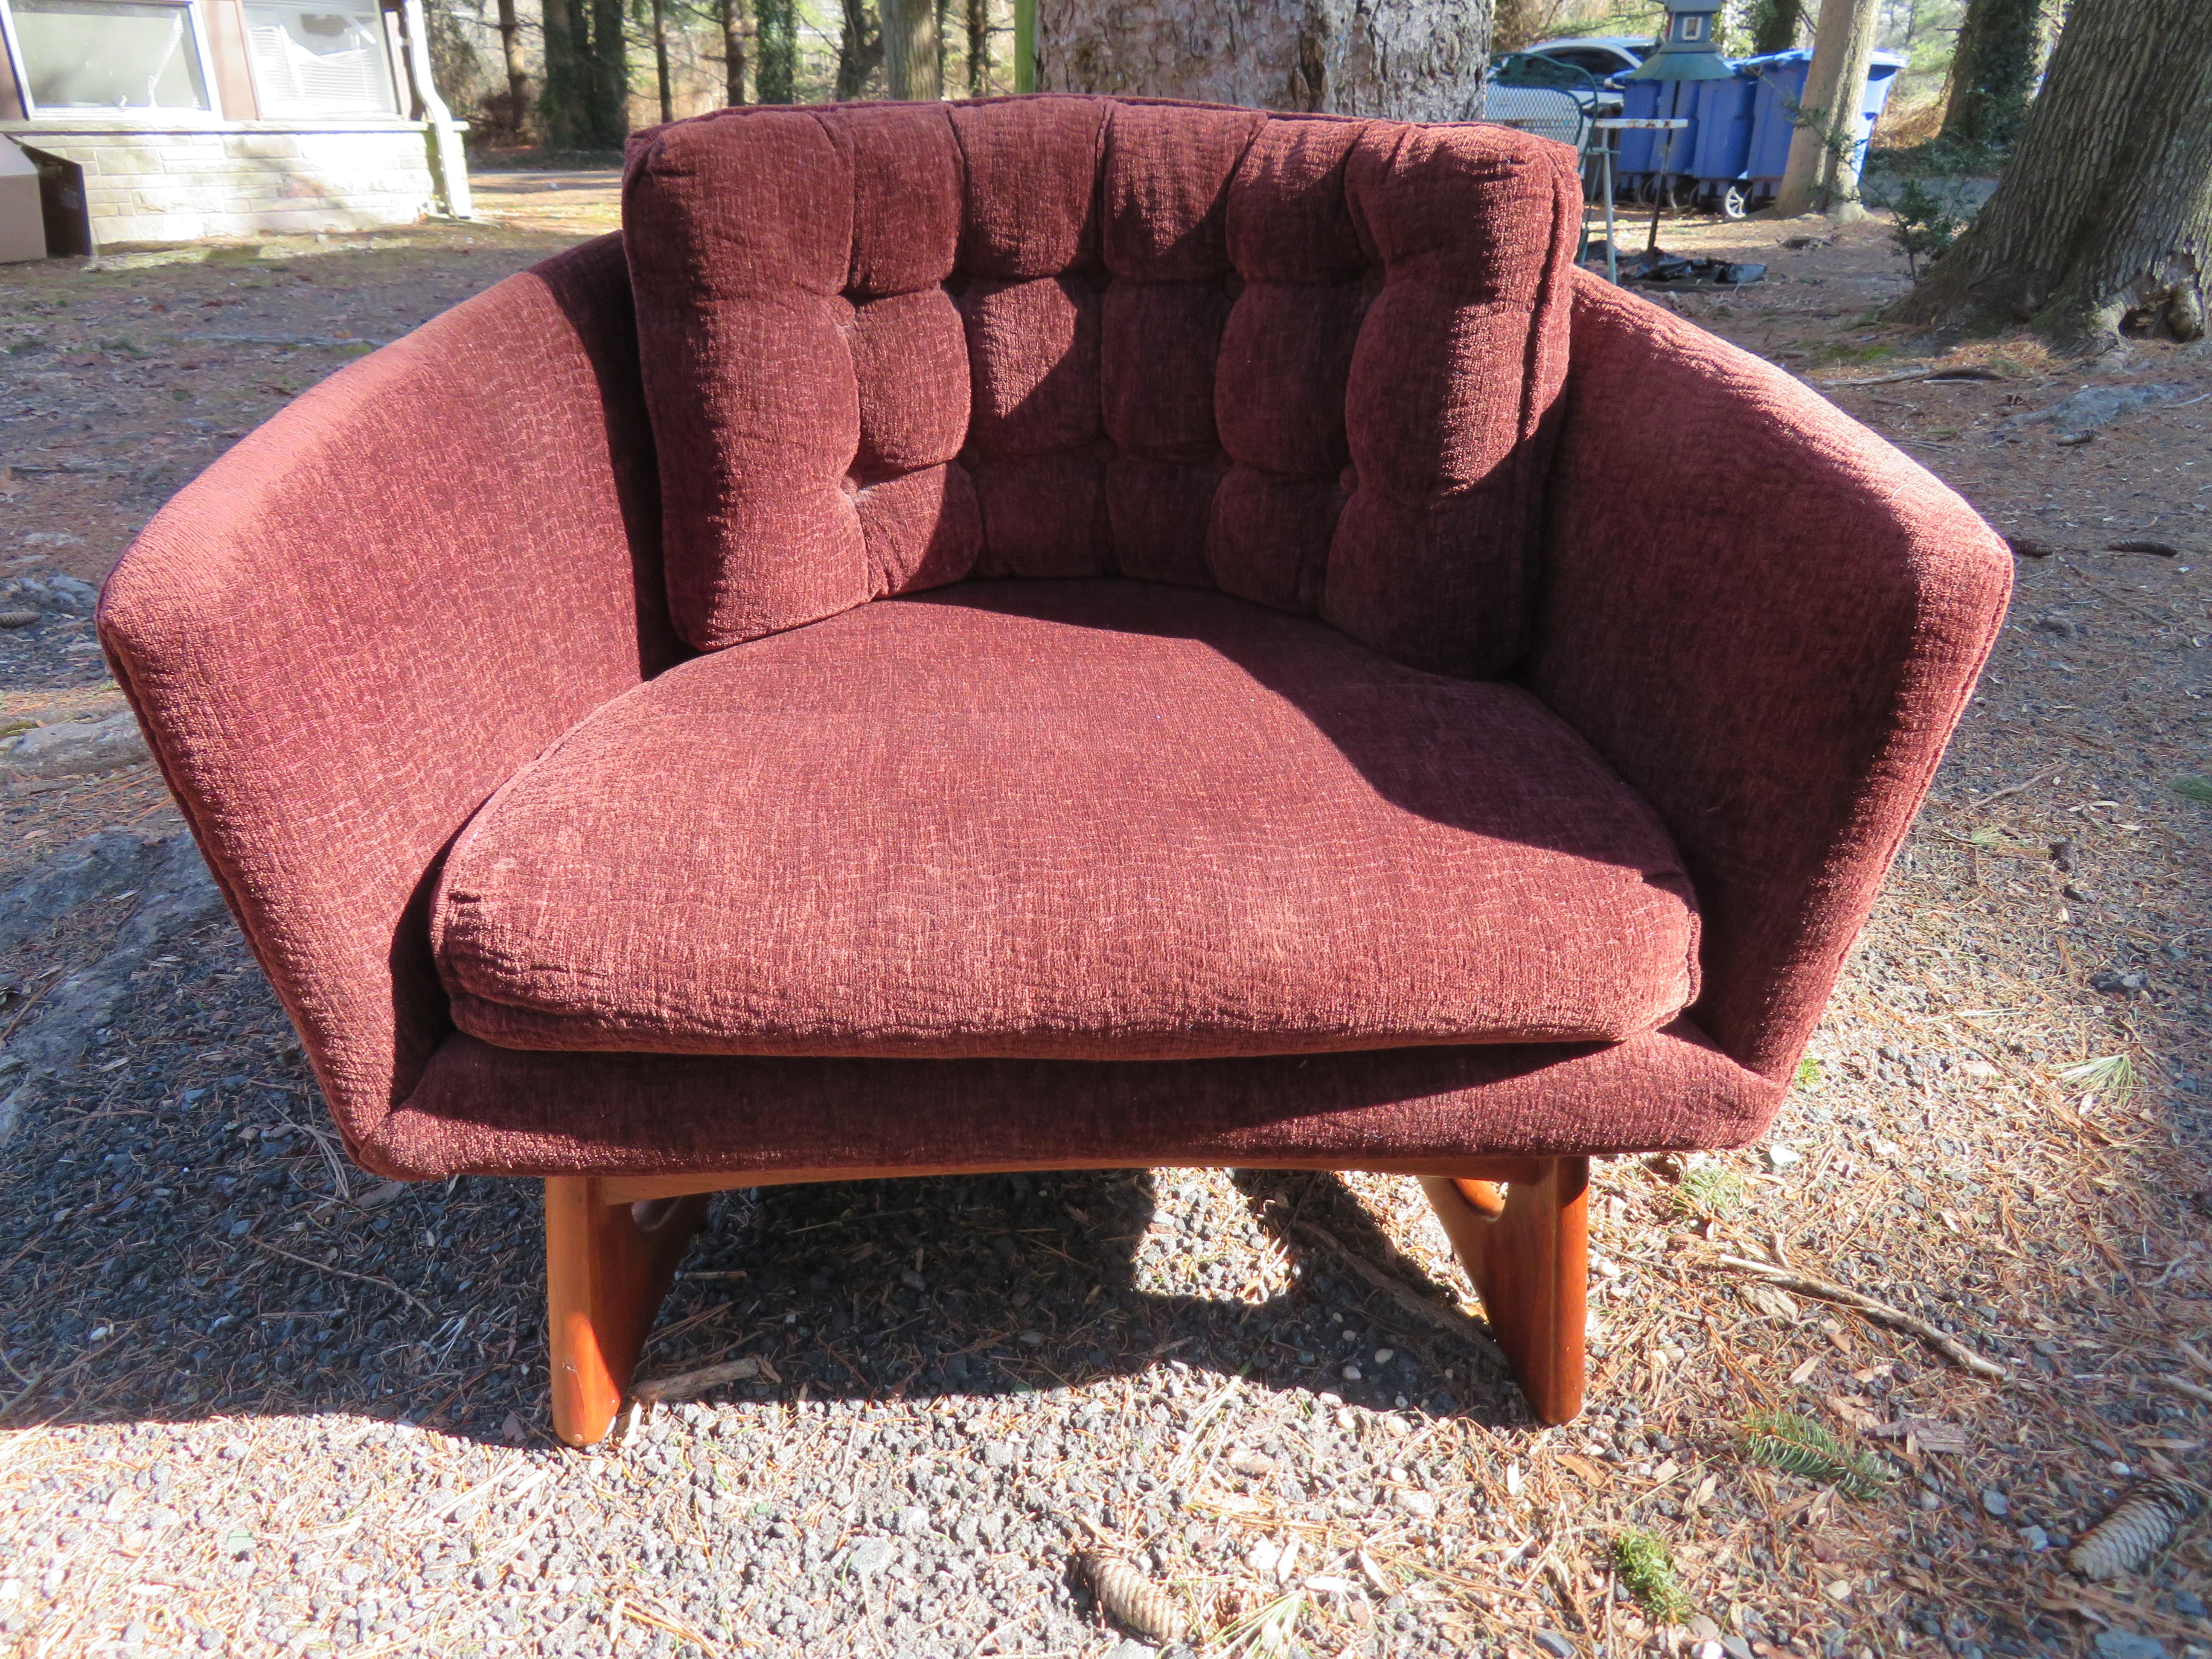 Lovely Adrian Pearsall Barrel Back Walnut Lounge Chair Mid-Century Modern In Good Condition For Sale In Pemberton, NJ